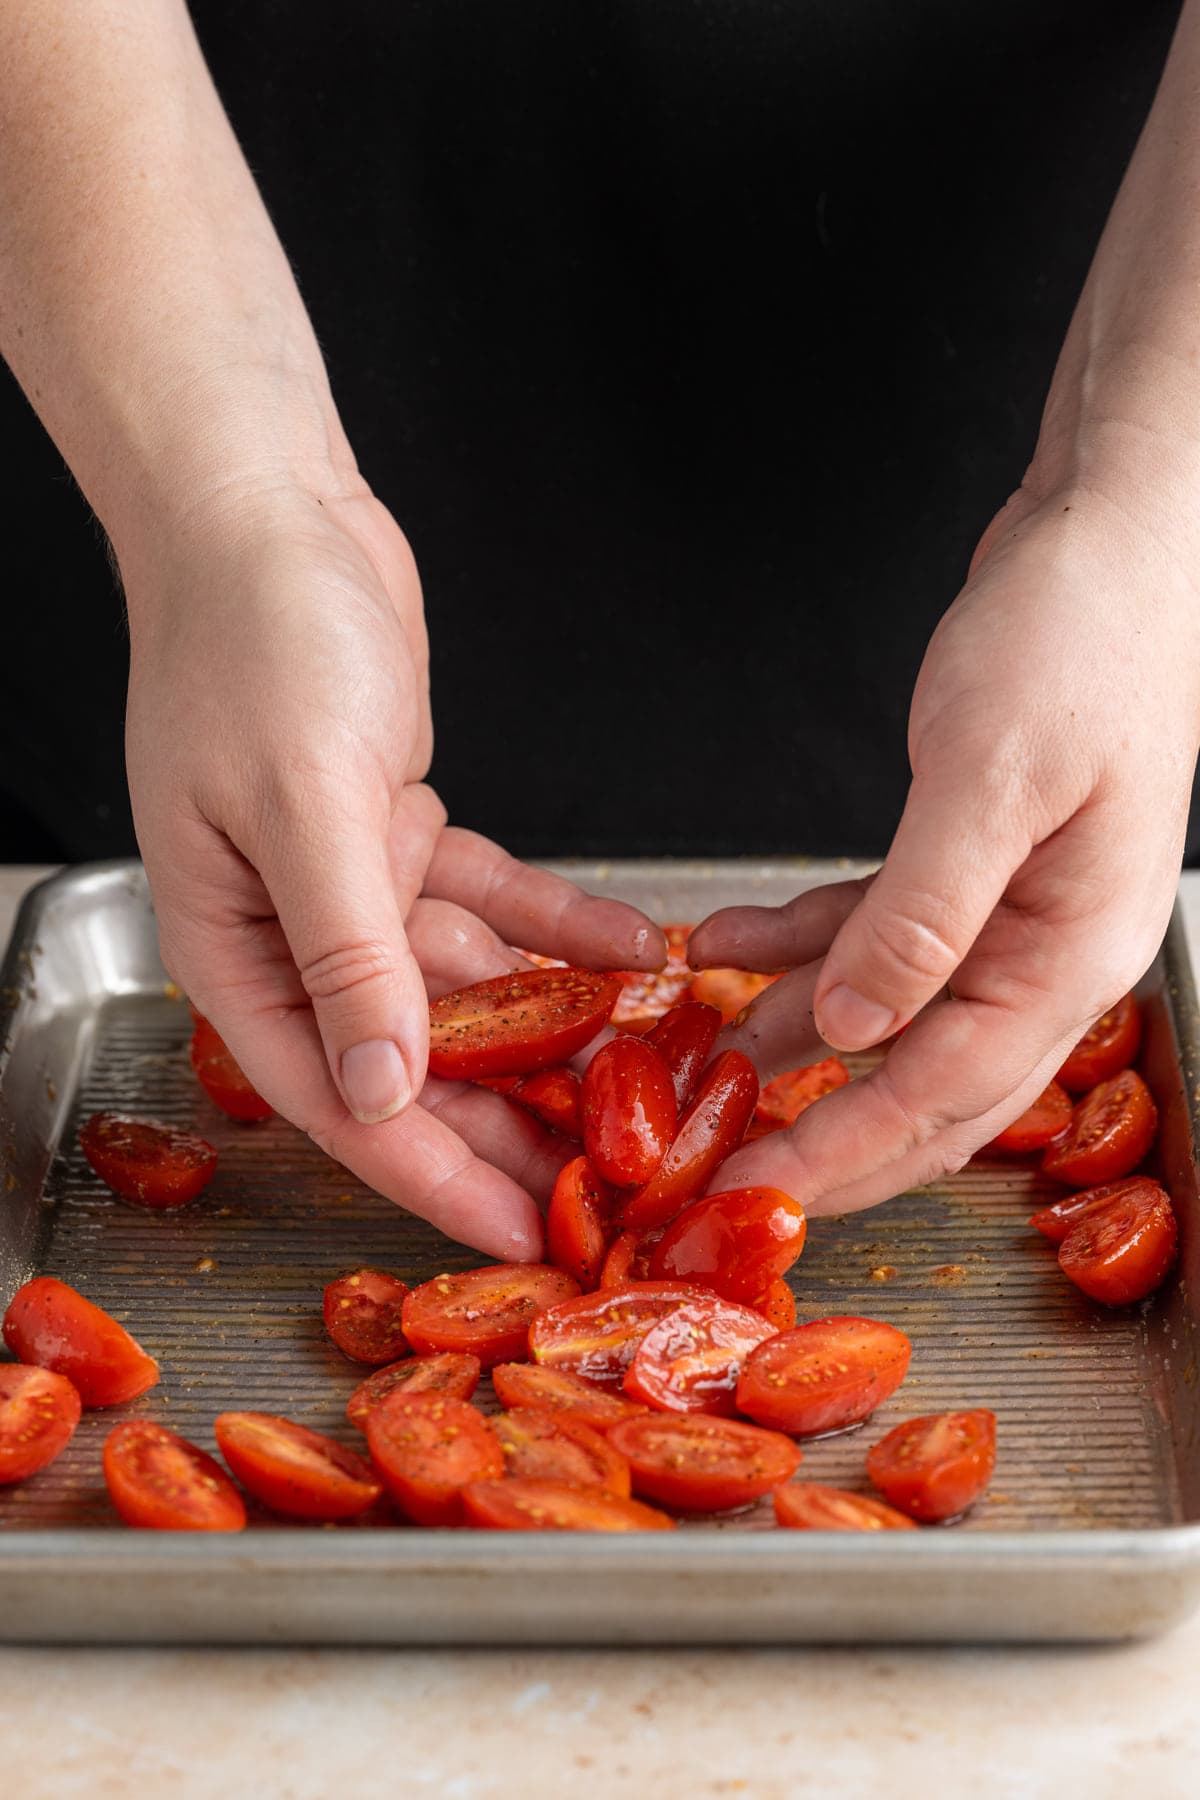 Tossing grape tomatoes in olive oil, salt, and pepper